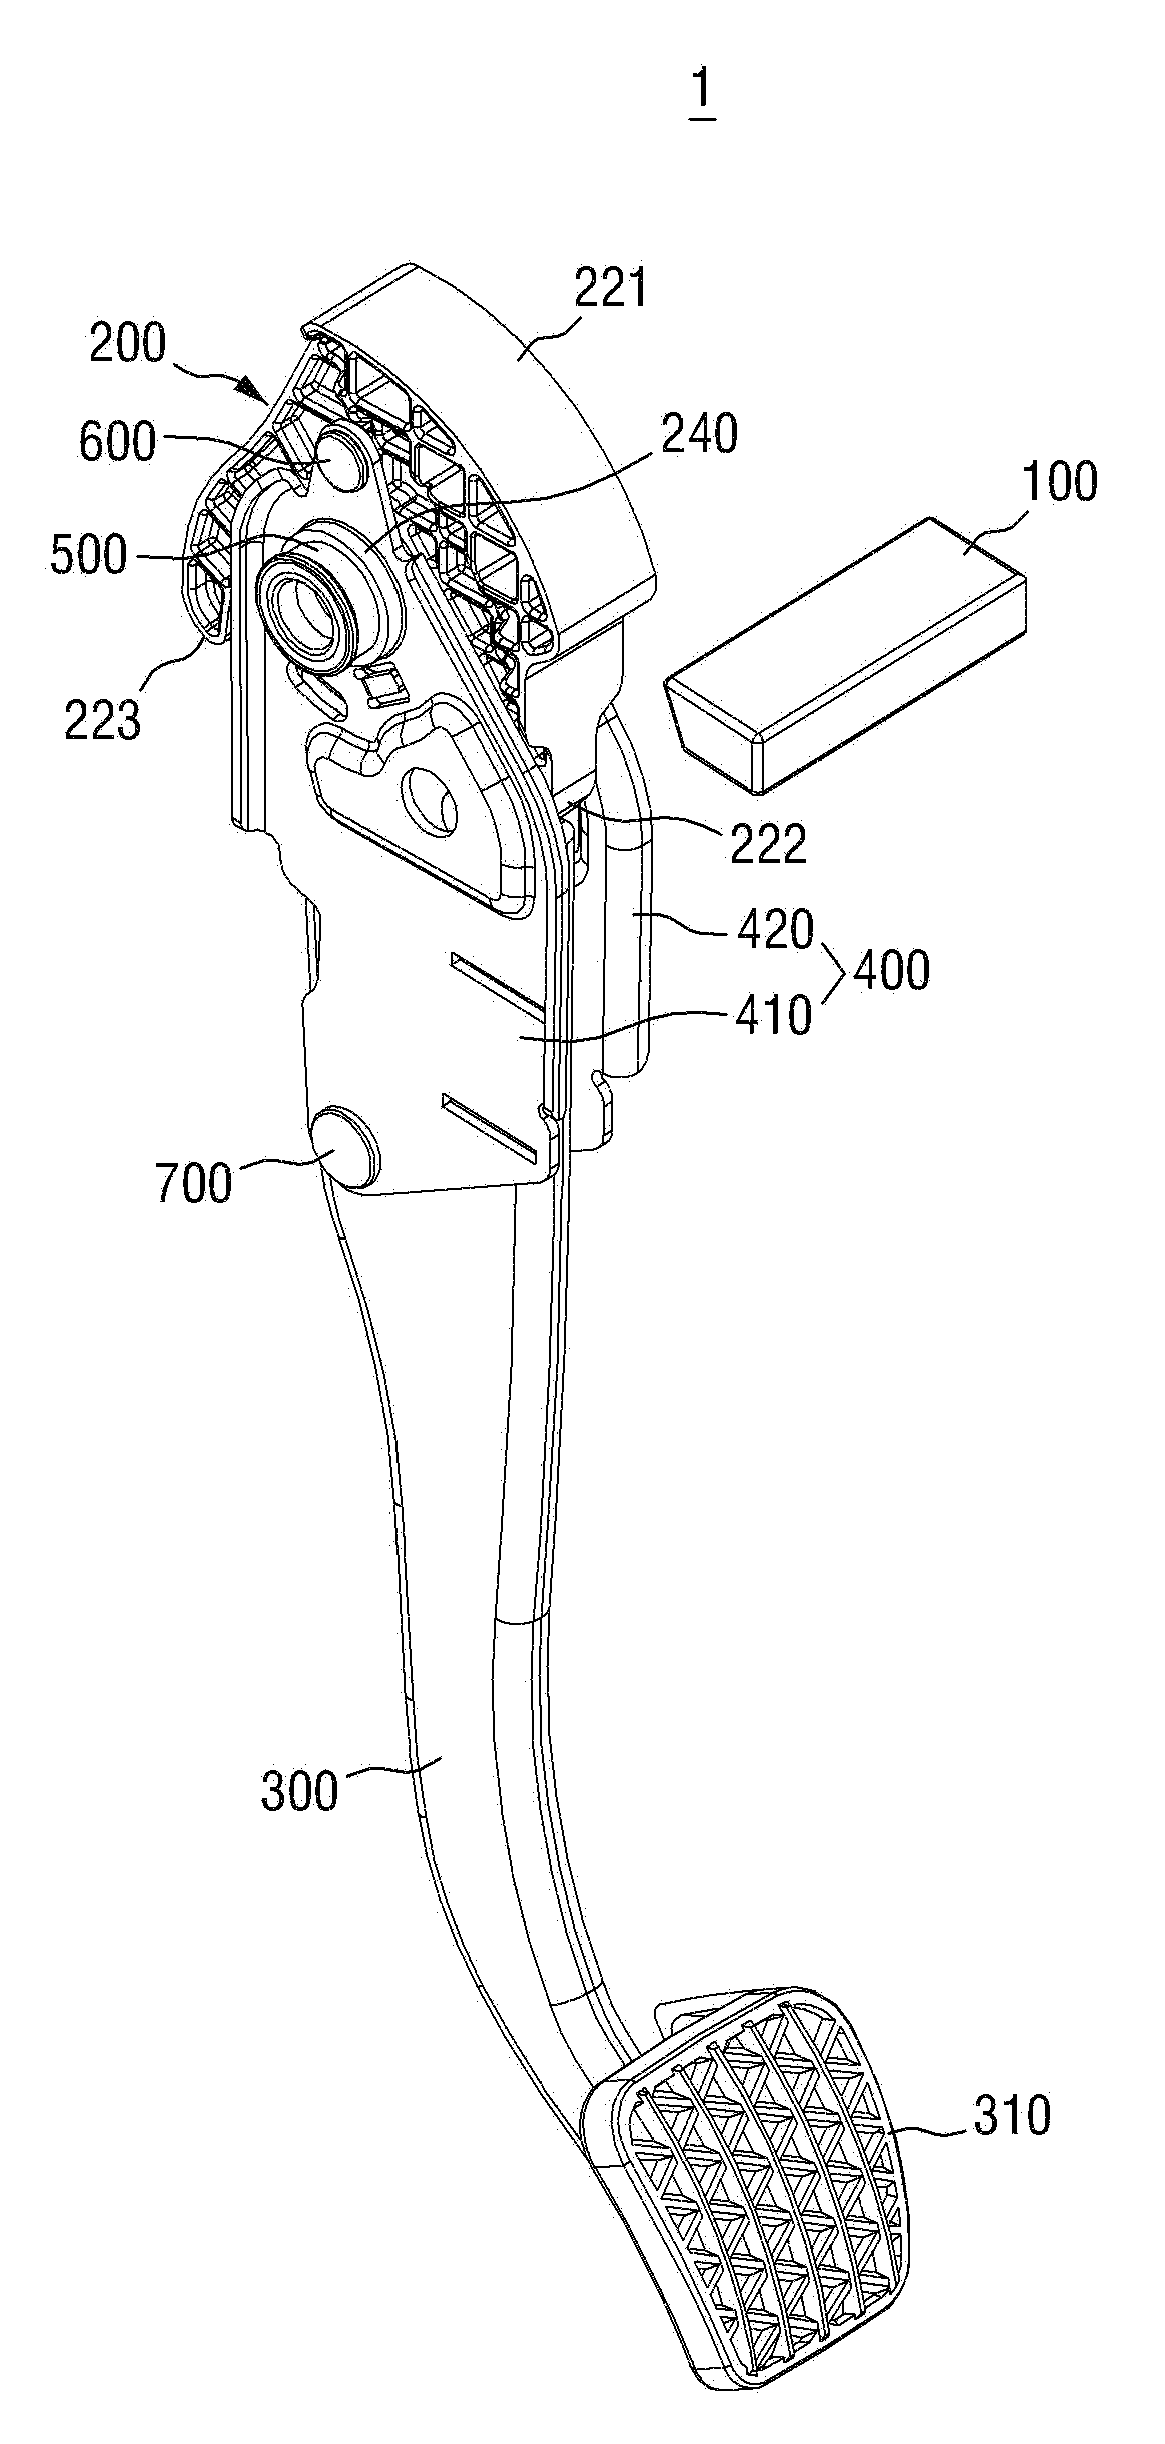 Apparatus for preventing automotive pedal from being pushed rearward